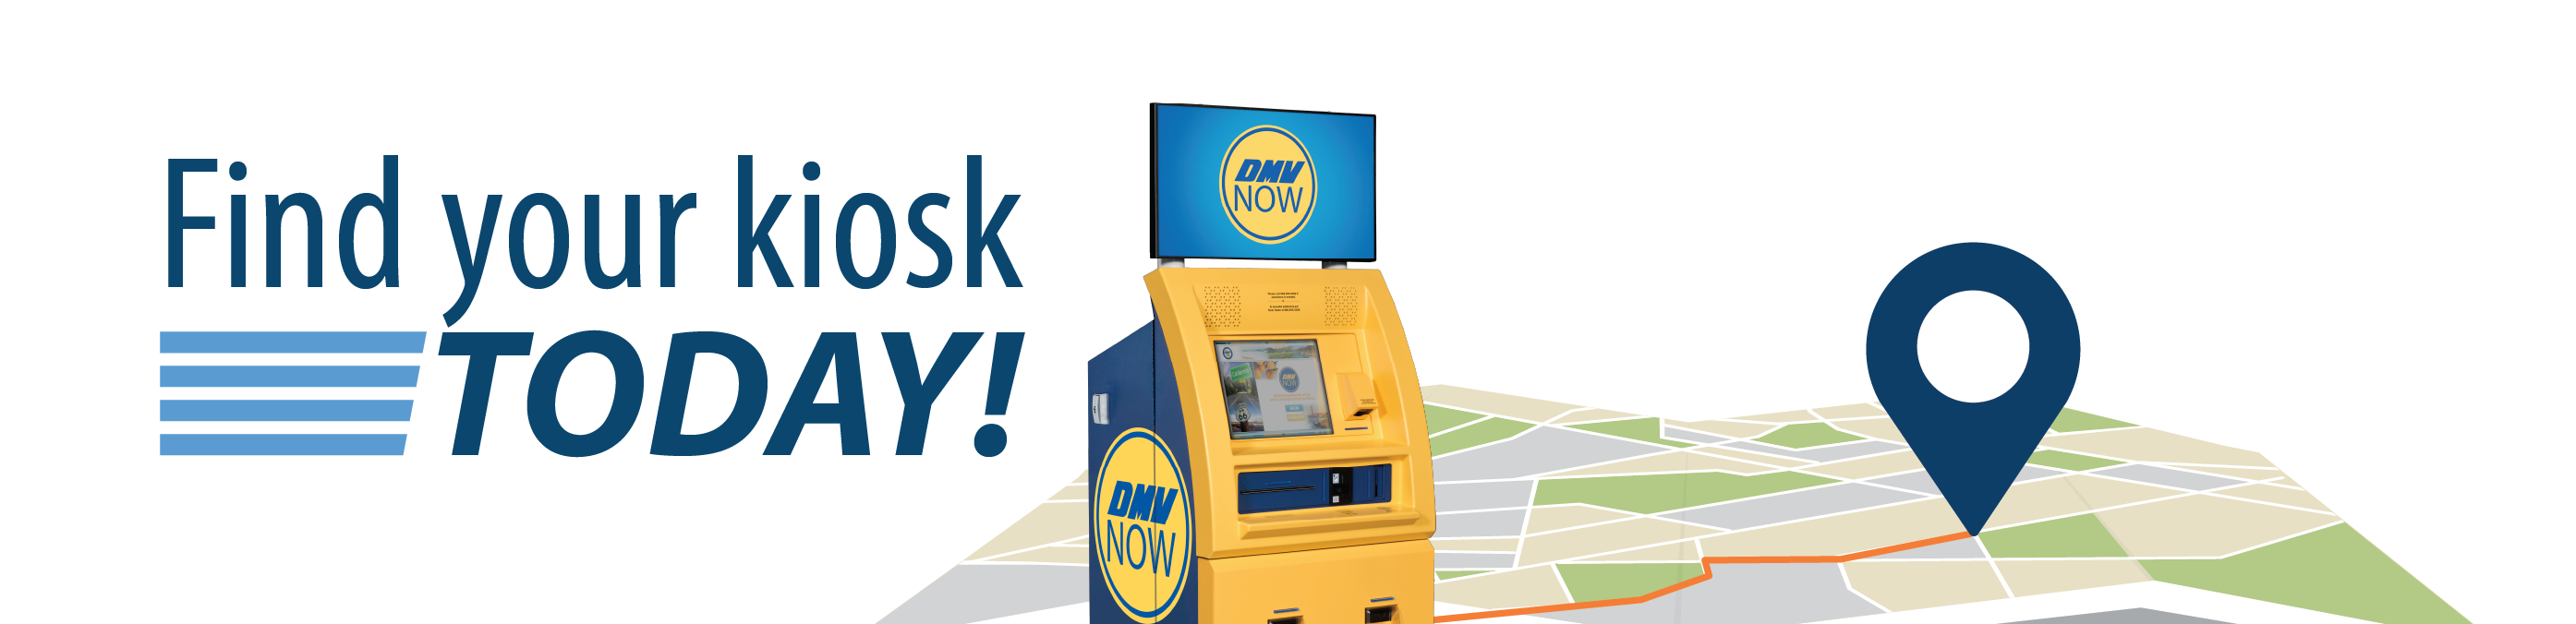 Find your kiosk today!